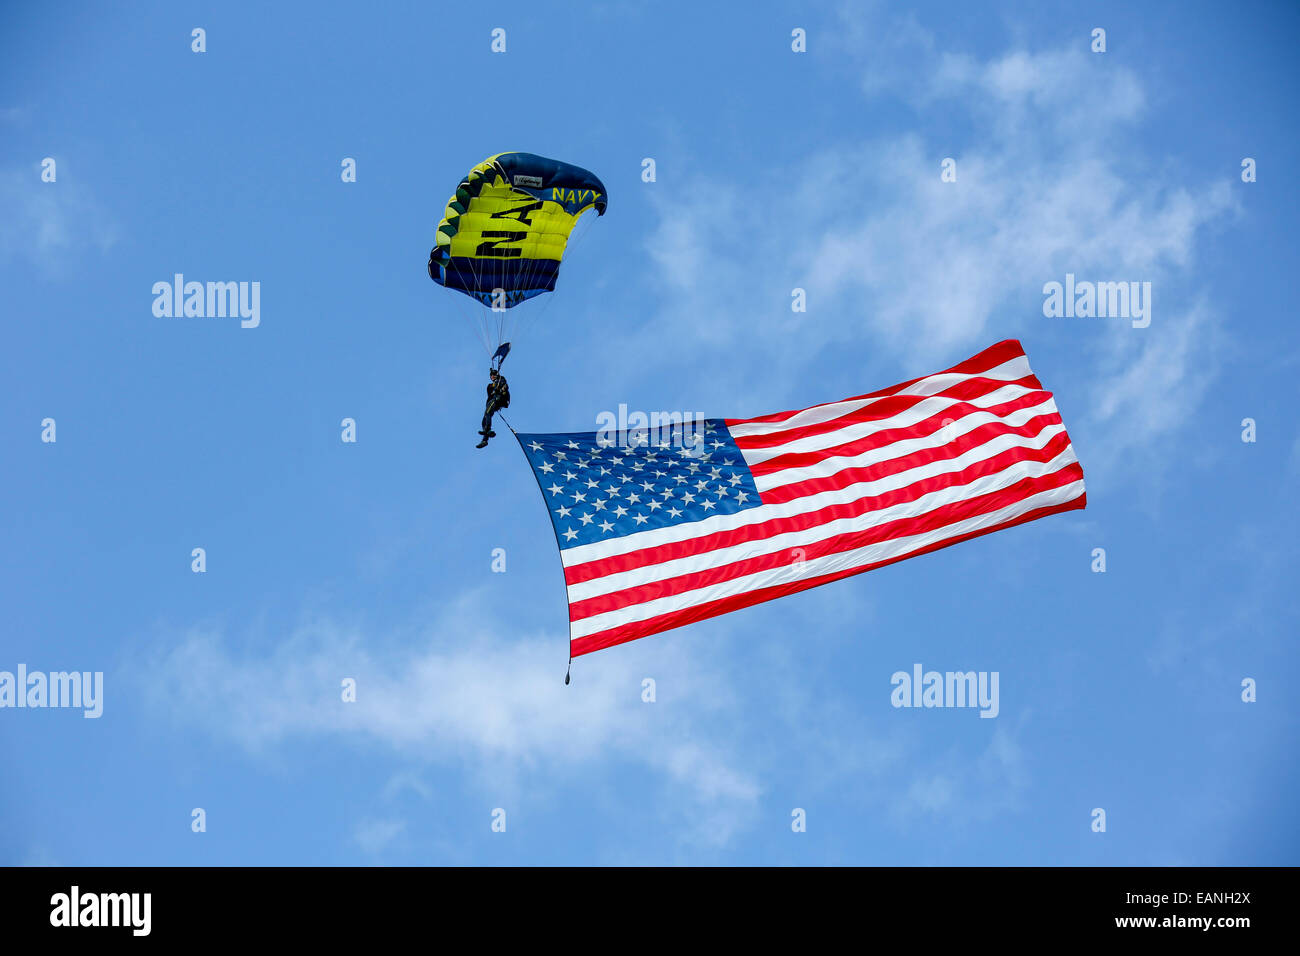 Member of the U.S. Navy Parachute Team, the Leap Frogs, flies the American Flag as he prepares to land at the demonstration grou Stock Photo